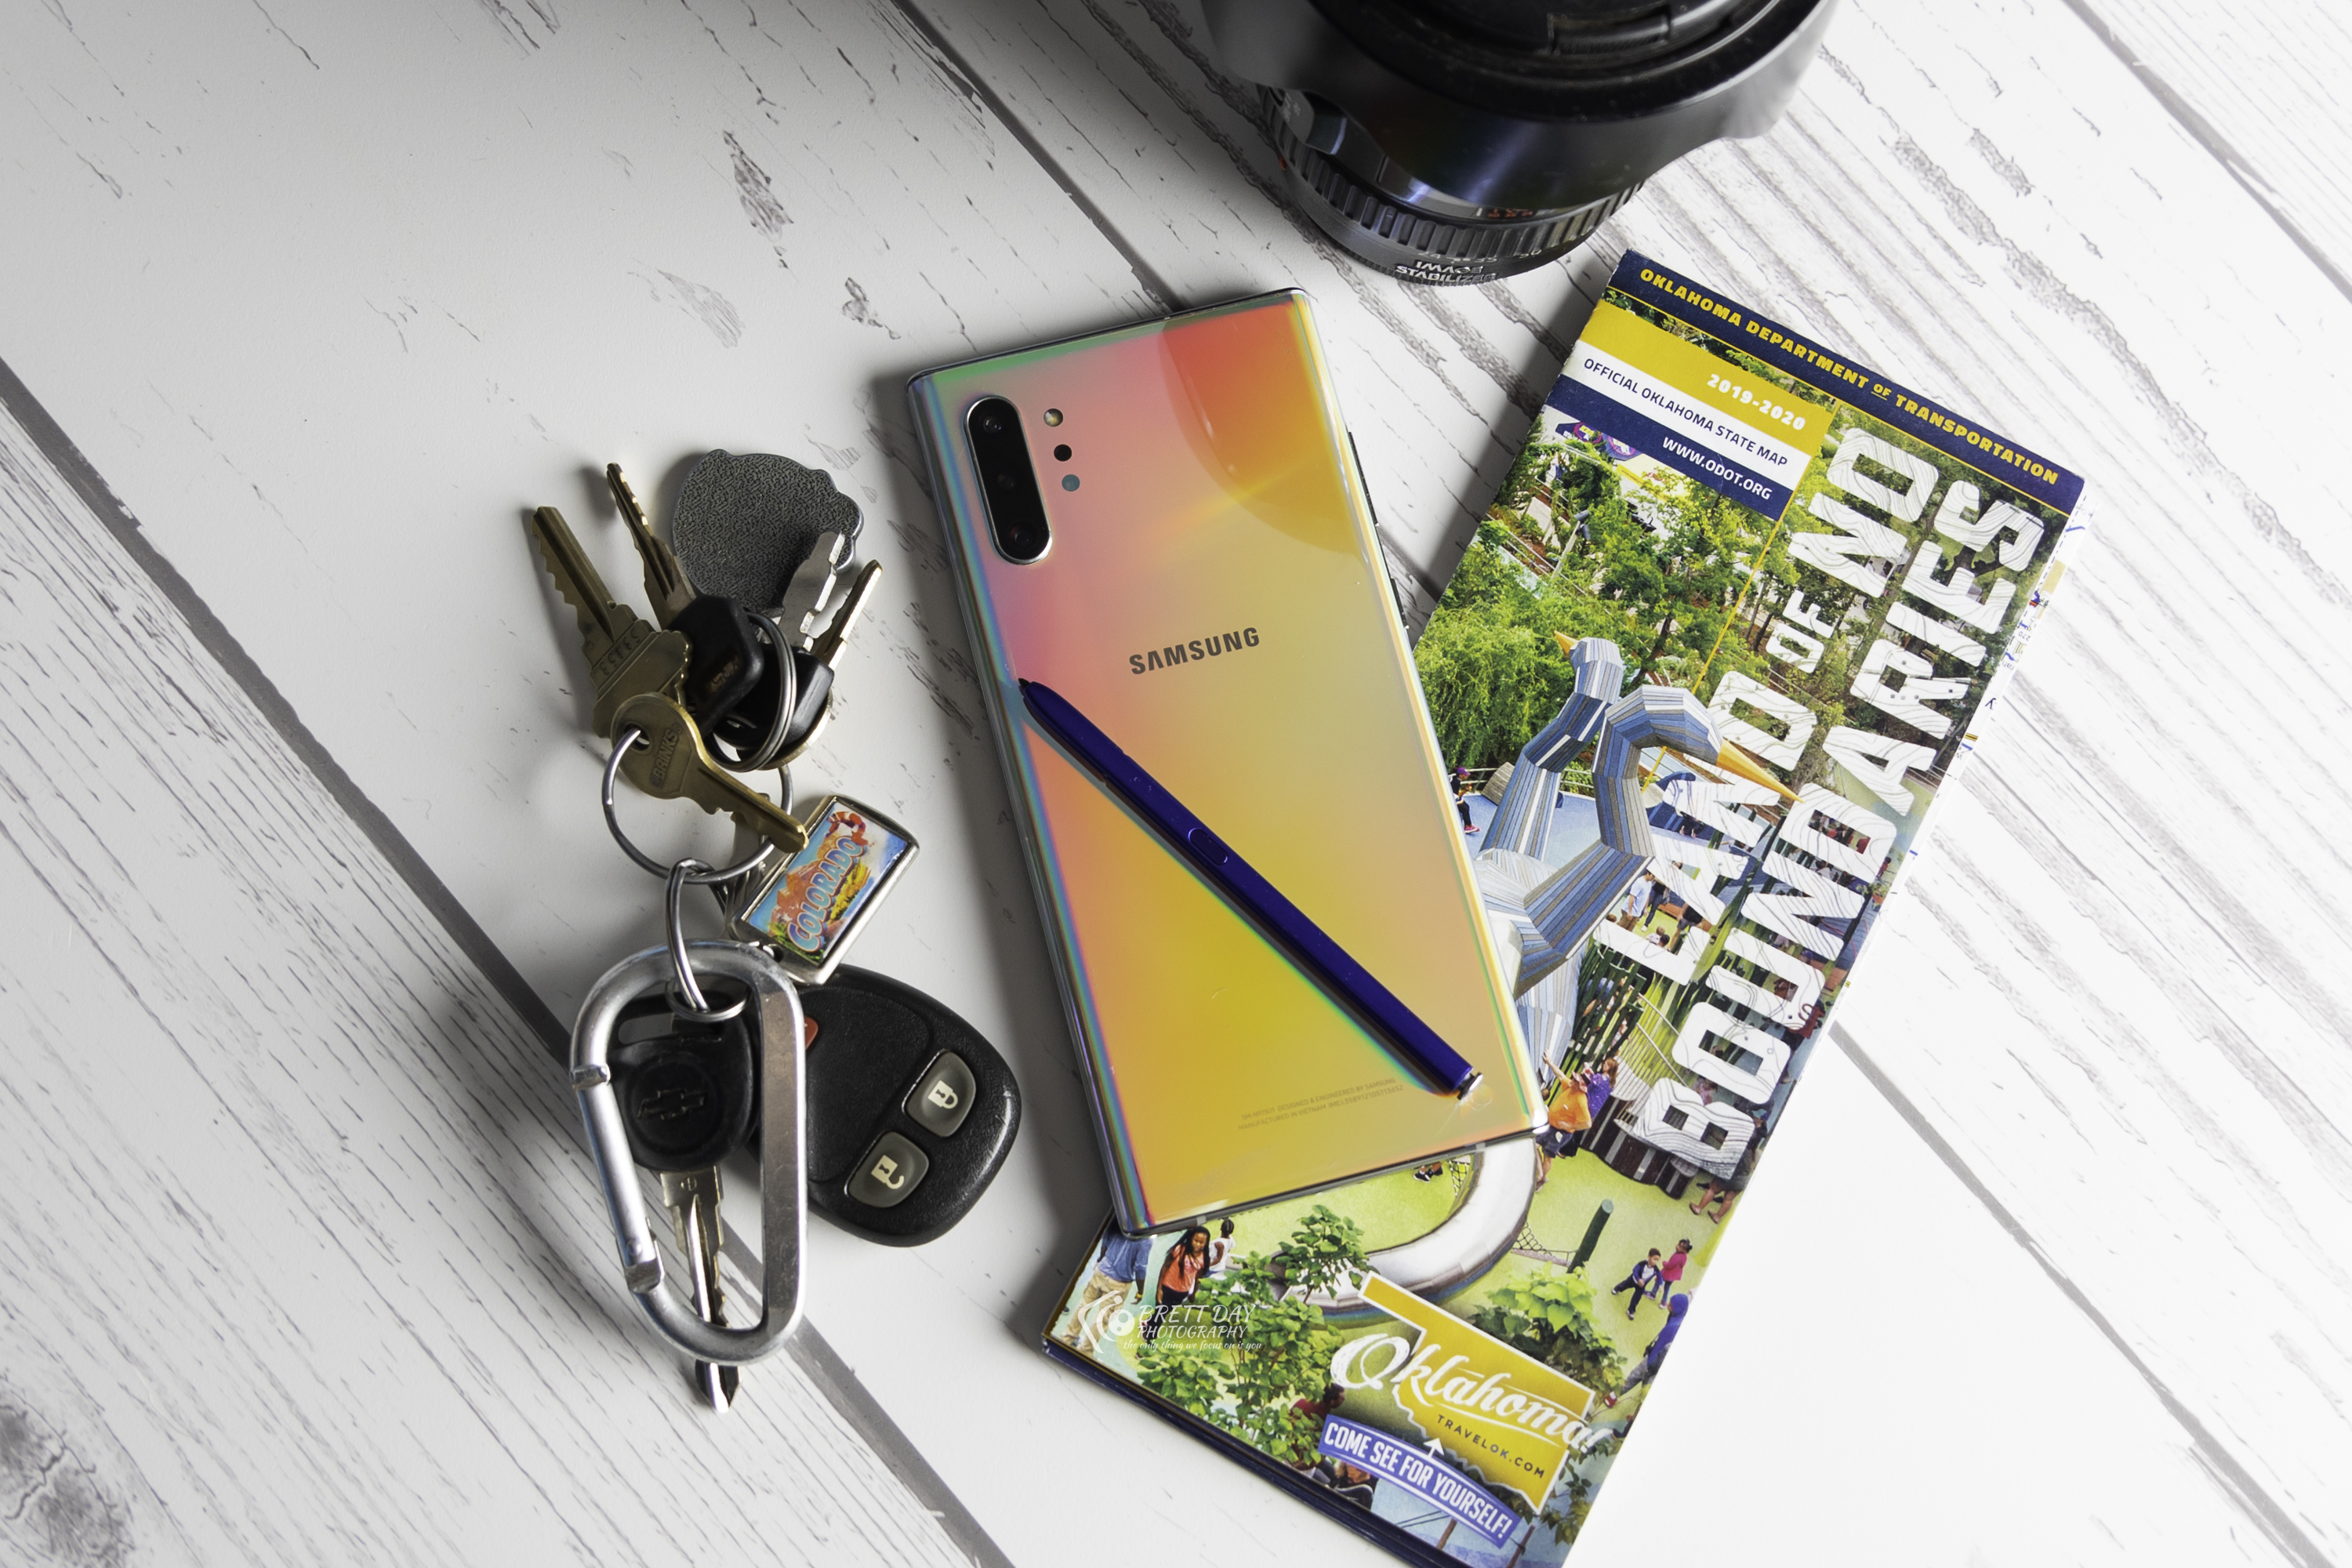 Samsung Galaxy Note 10+ review